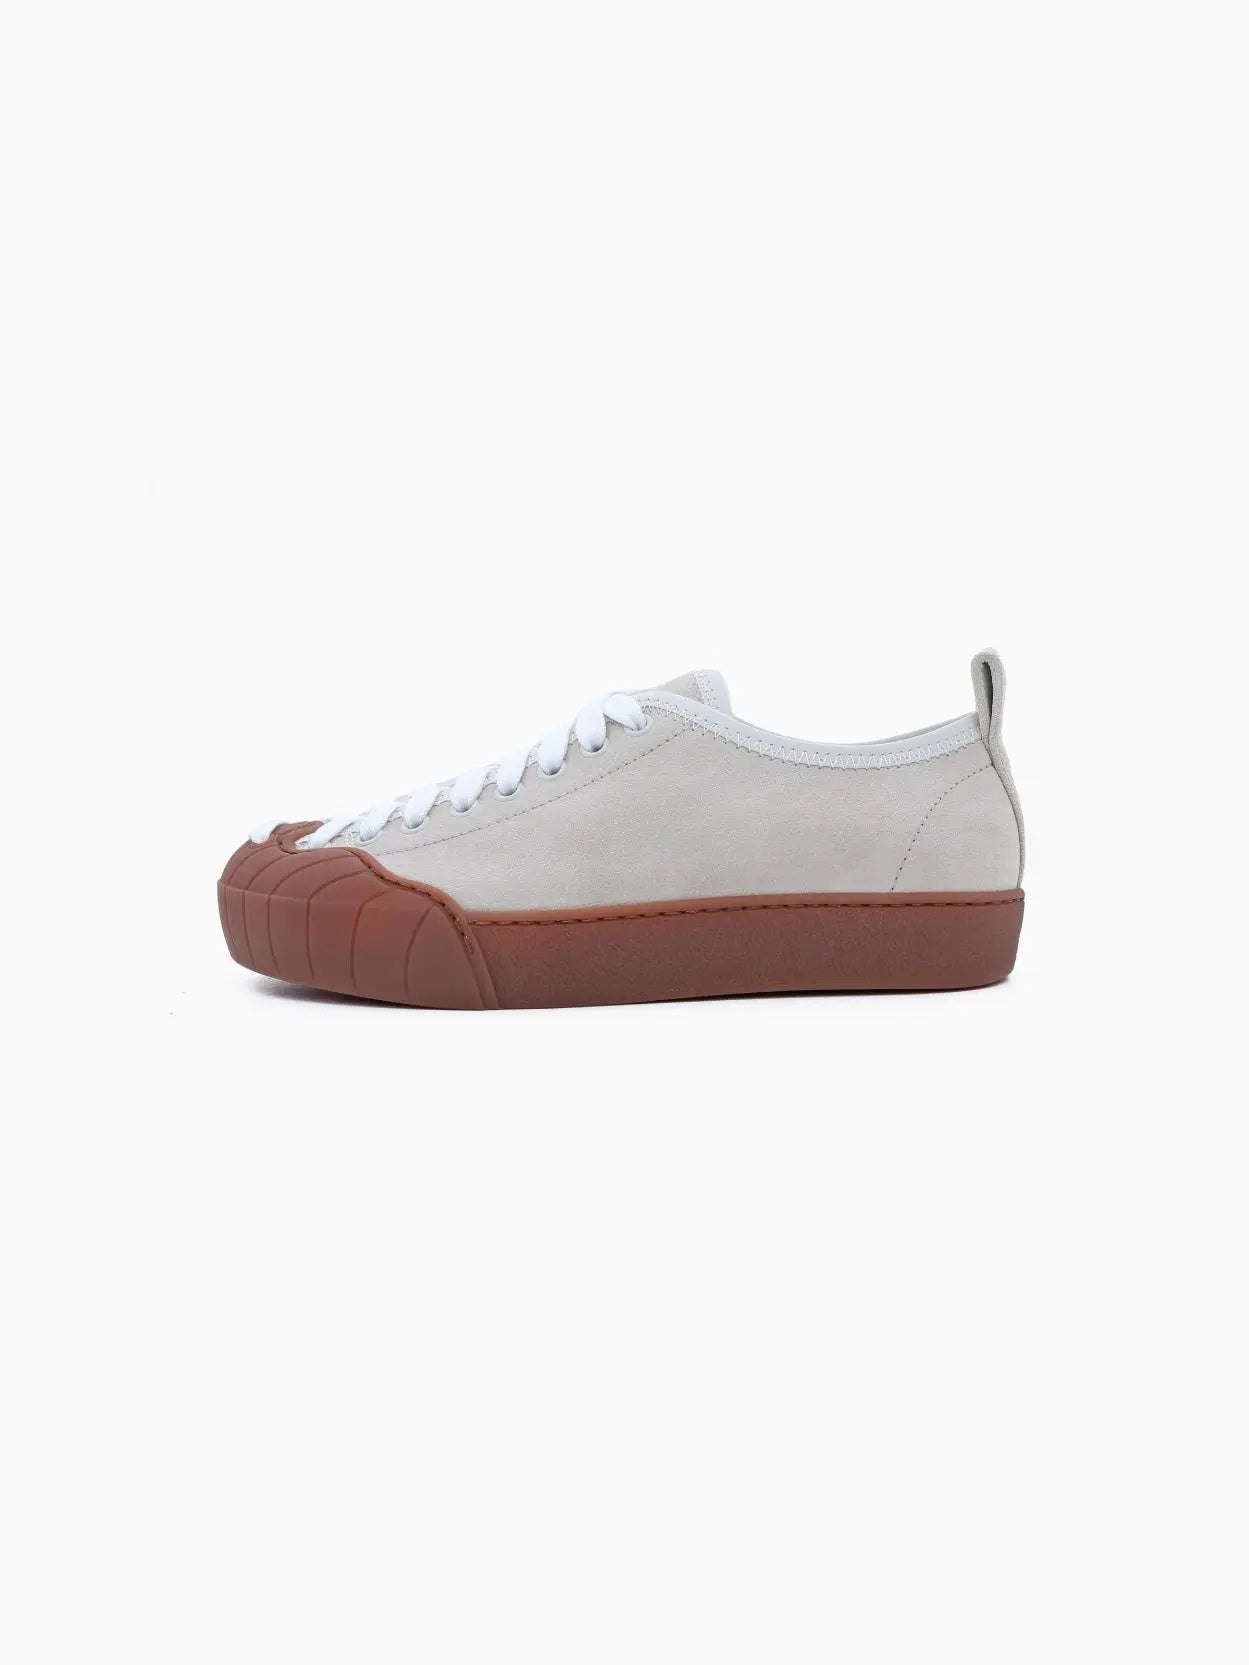 A side view of a single low-top sneaker with a beige upper, white laces, and a brown rubber sole that extends to cover the toe. The minimalist design includes a pull tab on the back for easy wear. Discover this chic **Sunnei Isi Low Off White** footwear at our Barcelona store or online at Bassalstore. The background is white.